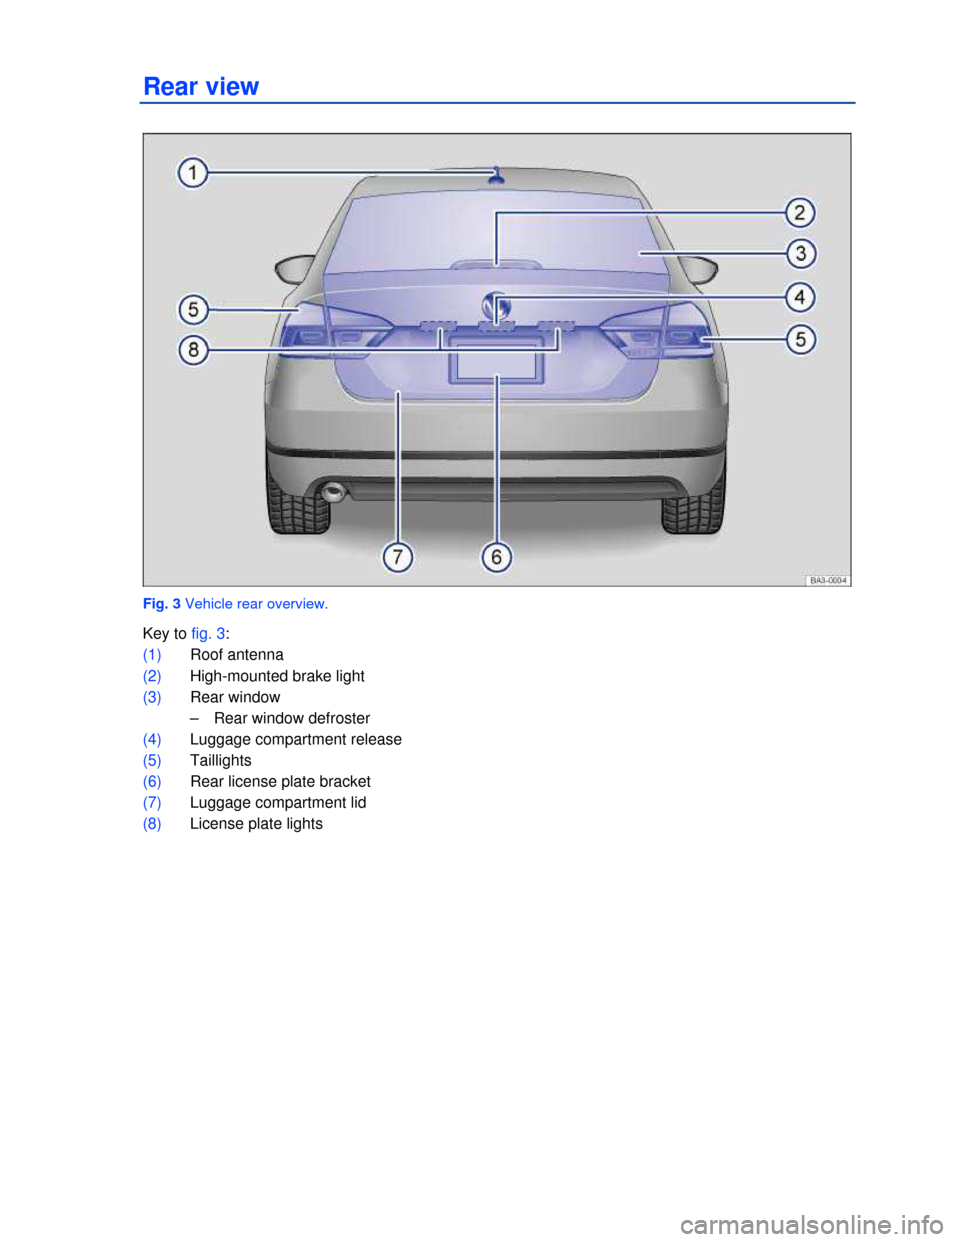 VOLKSWAGEN PASSAT 2013 B8 / 6.G Owners Manual  
Rear view 
 
Fig. 3 Vehicle rear overview. 
Key to fig. 3: 
(1) Roof antenna  
(2) High-mounted brake light 
(3) Rear window 
–  Rear window defroster  
(4) Luggage compartment release  
(5) Taill